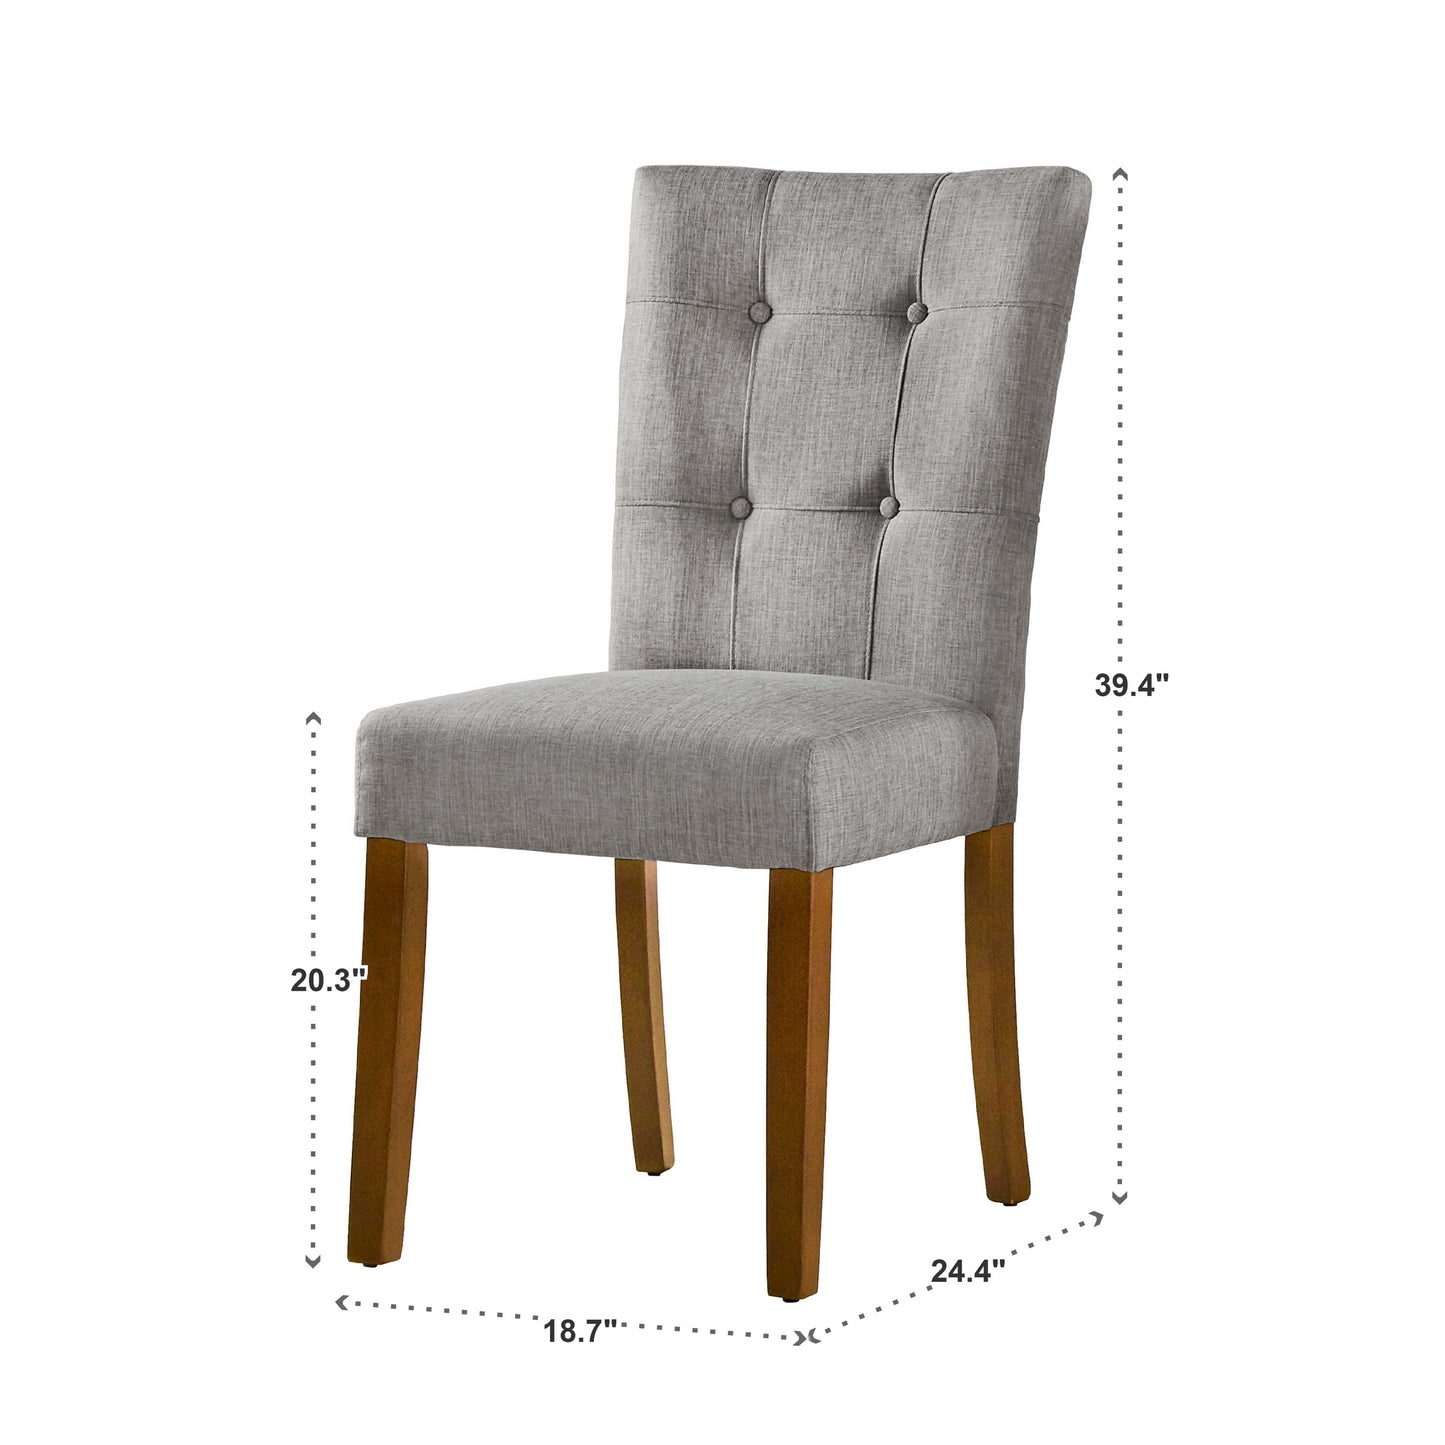 Cherry Finish Upholstered Dining Chairs (Set of 2) - Grey Linen